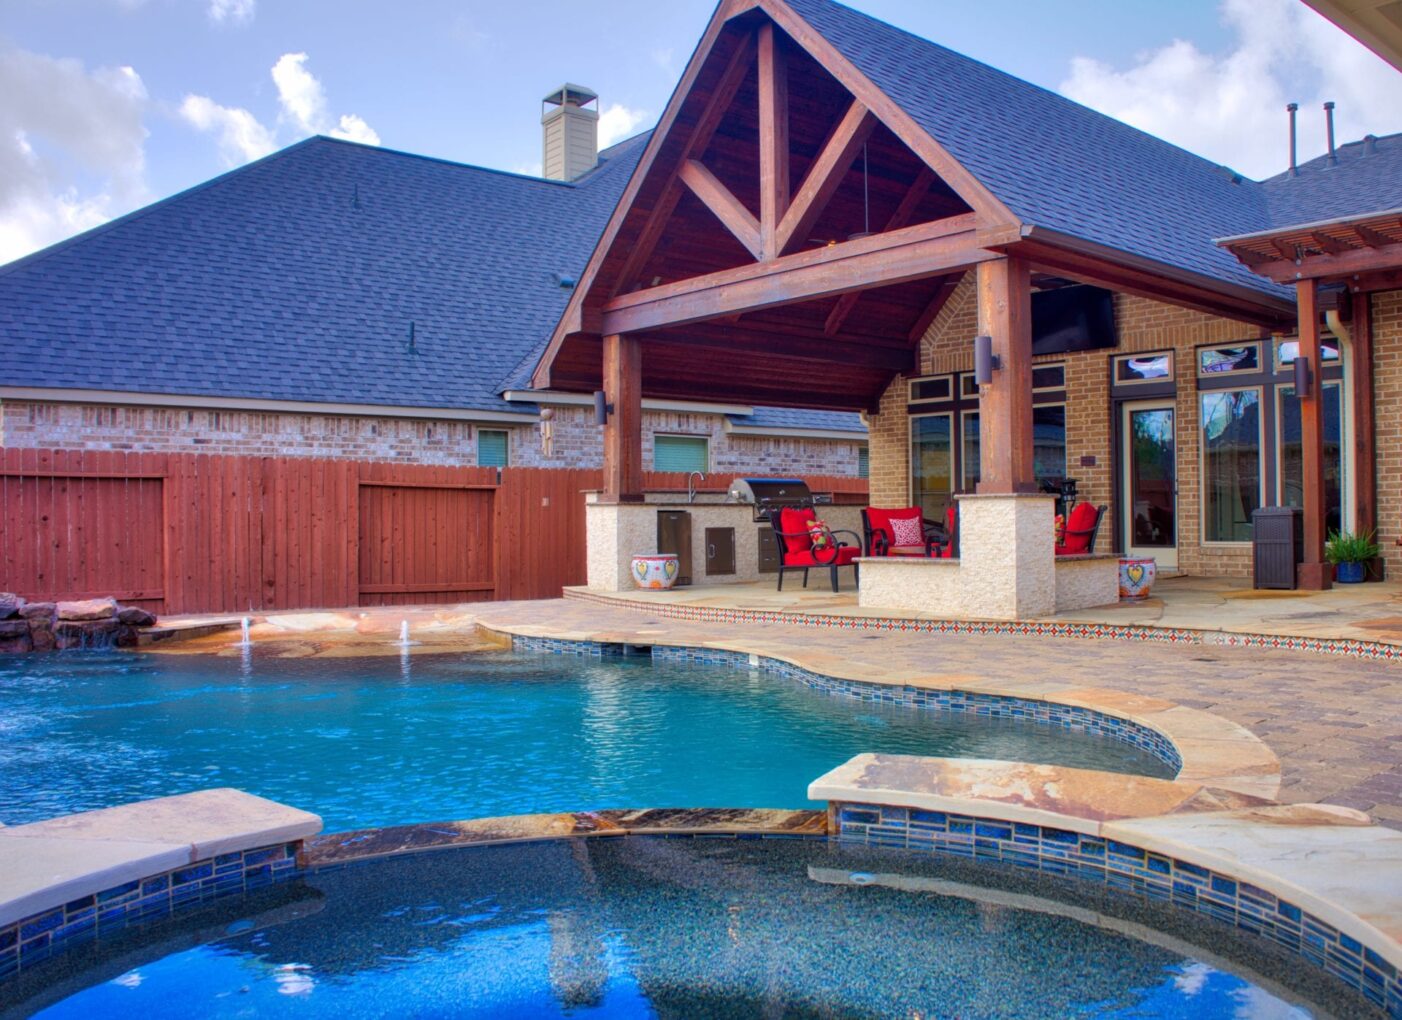 A pool with a large covered patio next to it.